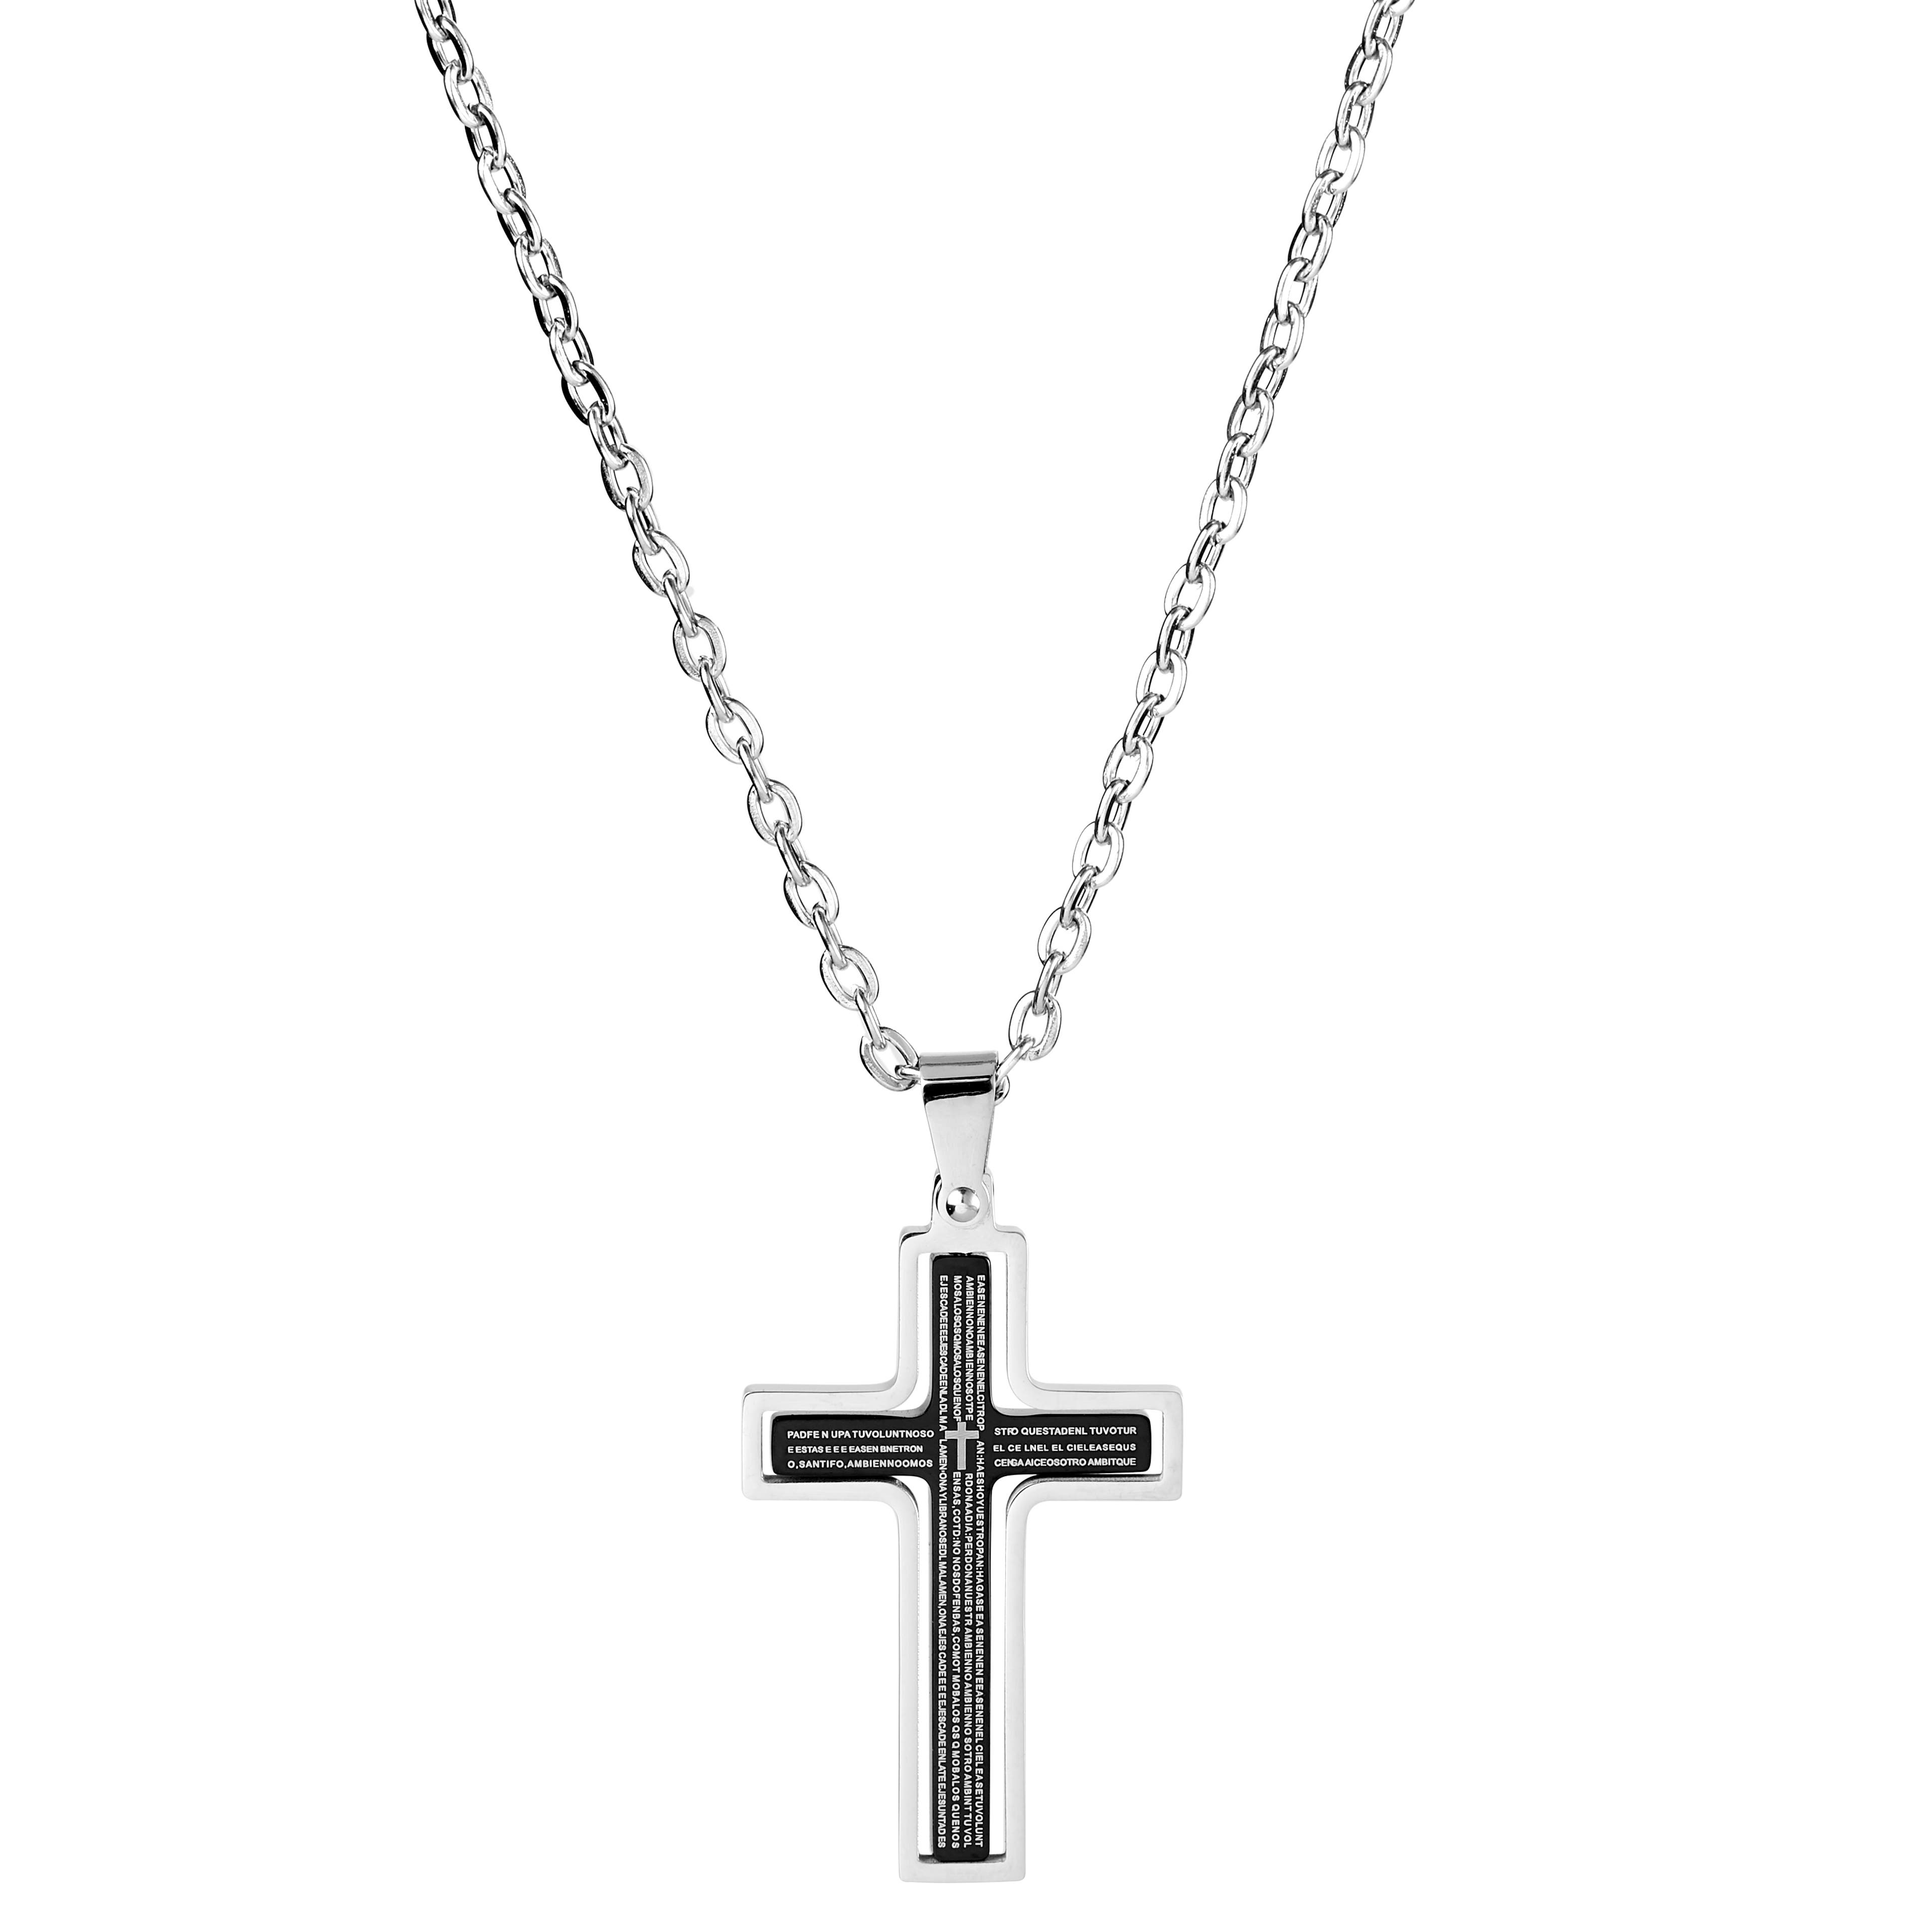 Silver-Tone & Black Stainless Steel Revolving Cross Cable Chain Necklace